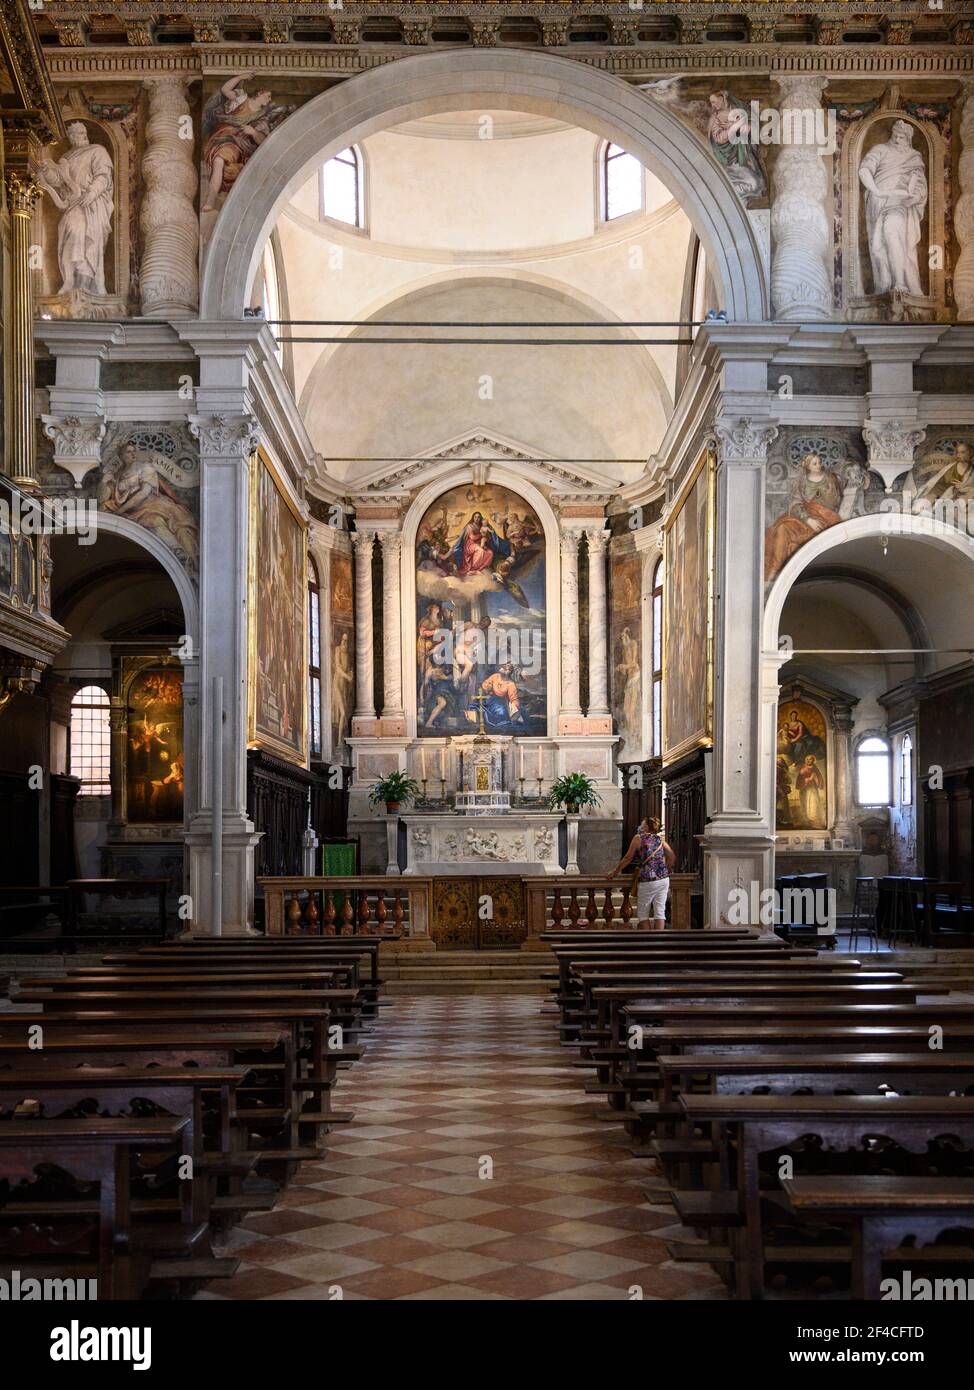 Venice. Italy.  Interior of the Chiesa di San Sebastiano (Church of Saint Sebastian), the high altarpiece, depicting the Virgin and Child in Glory wit Stock Photo